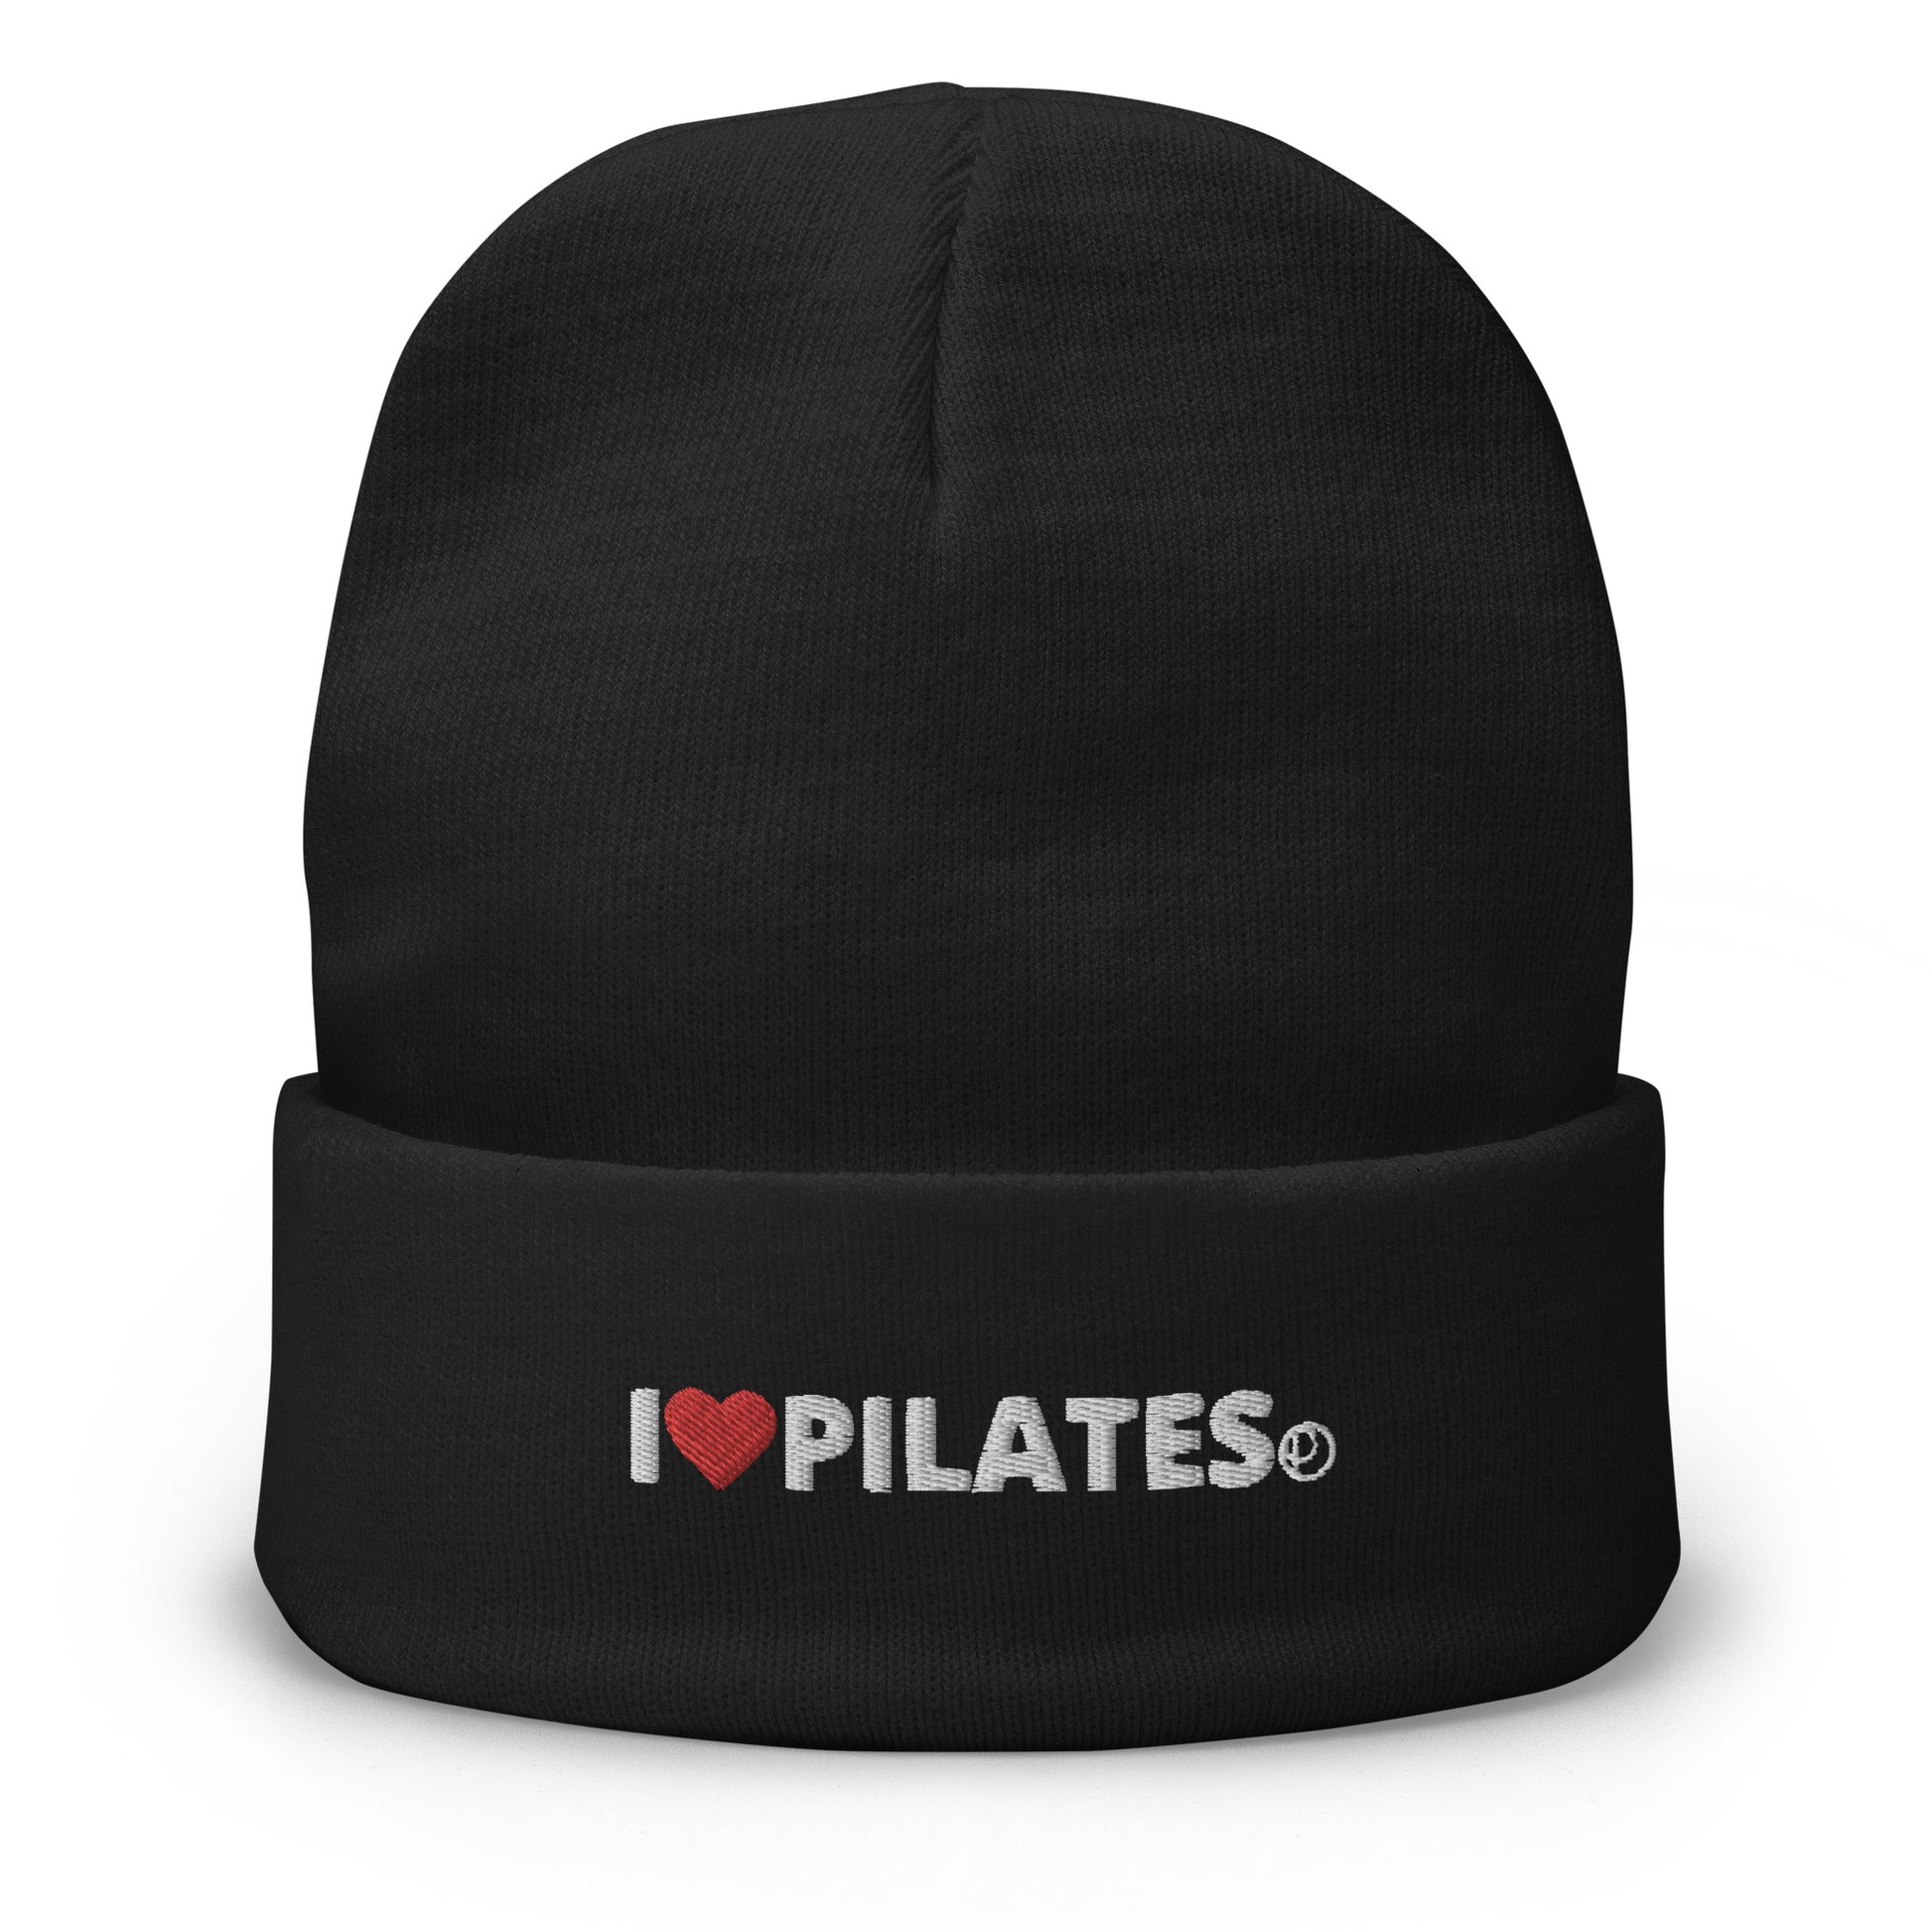 I love Pilates embroidered beanie - Pilates gifts - Gifts for Pilates teachers 